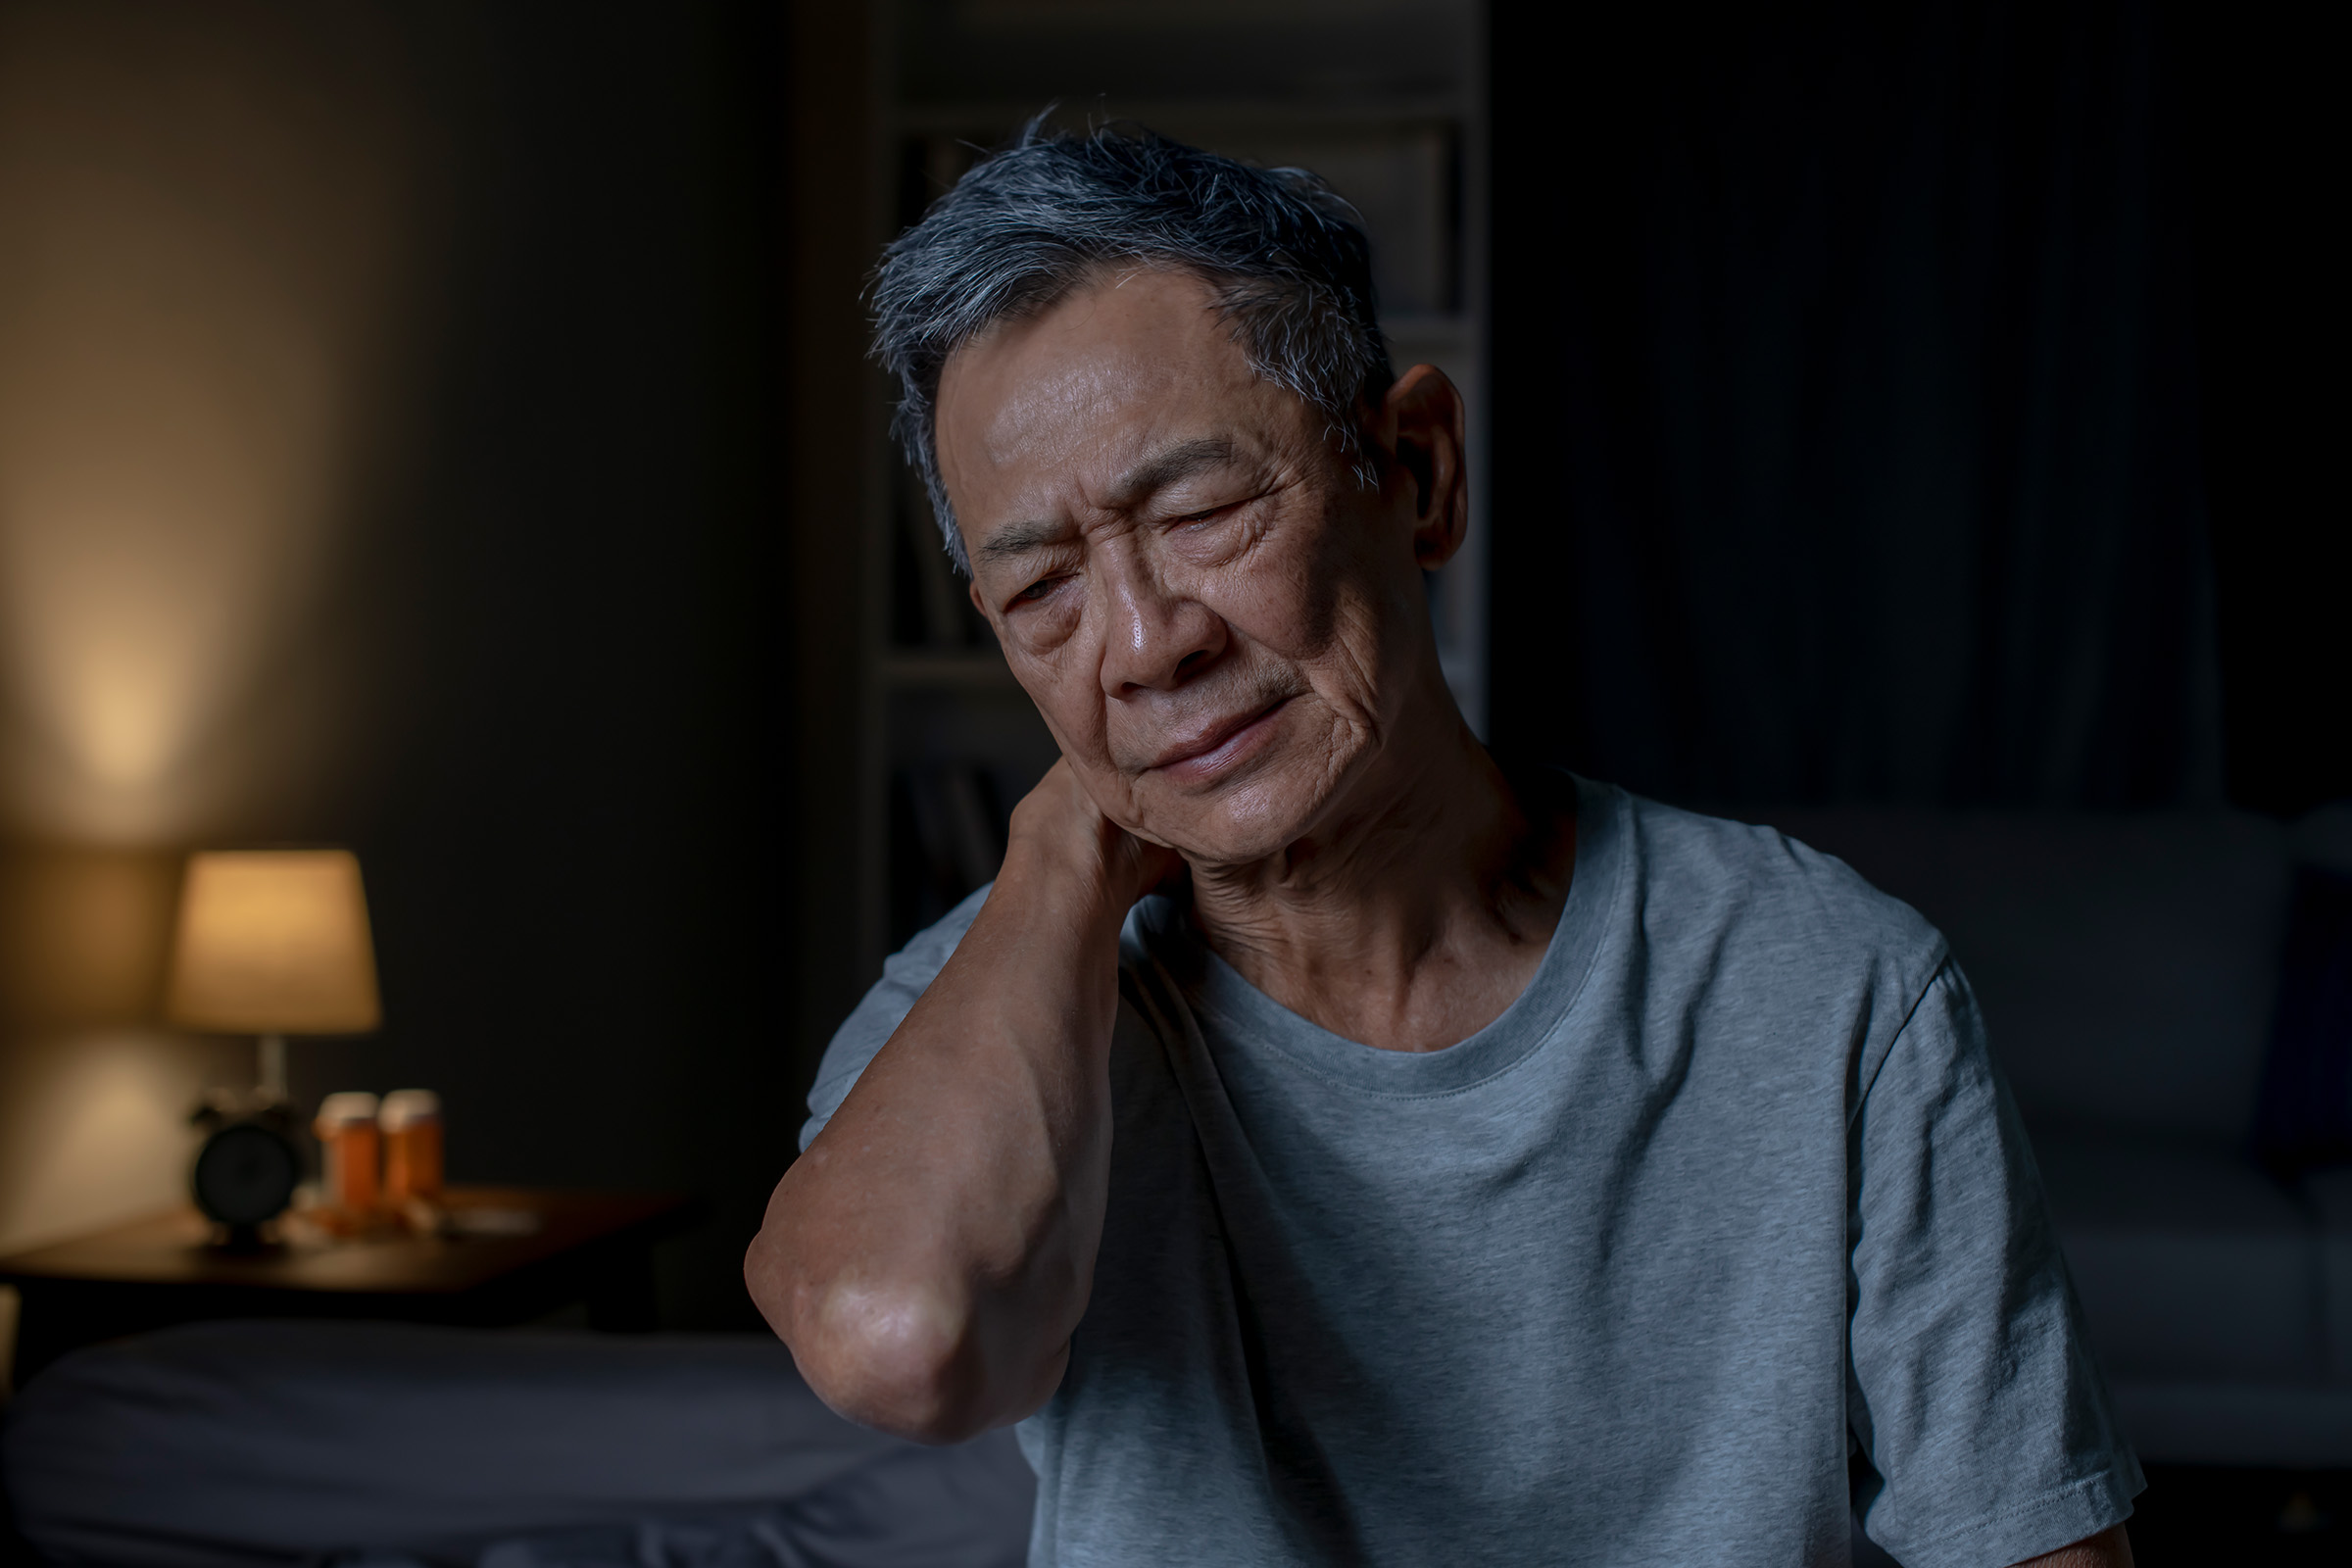 Older man sitting in dark room with hand on back of neck looking tired. 